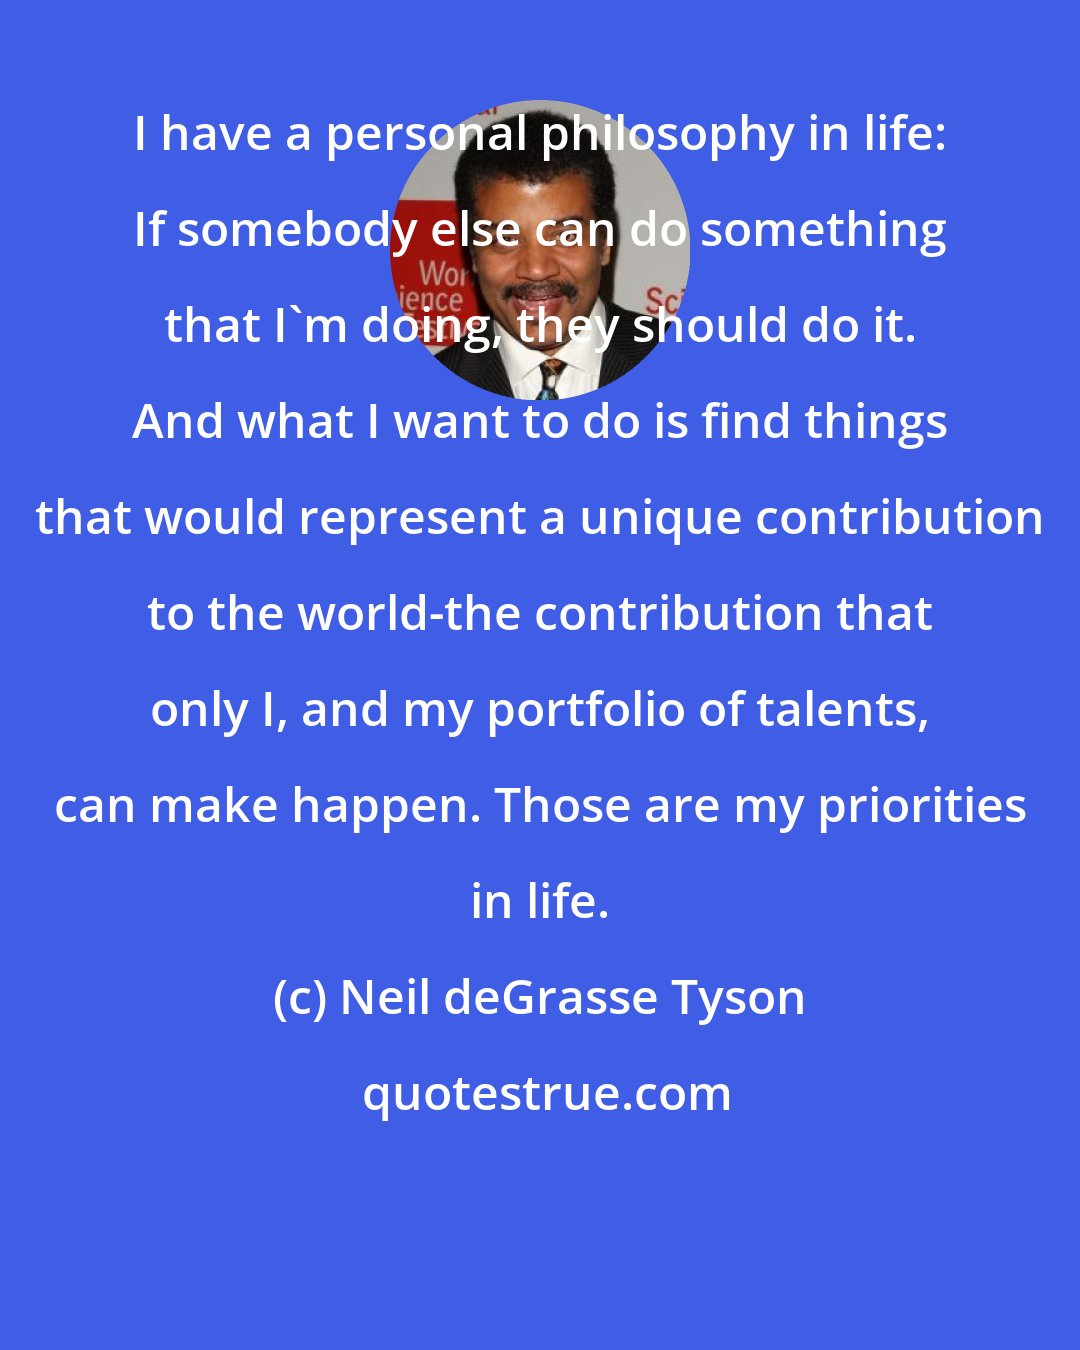 Neil deGrasse Tyson: I have a personal philosophy in life: If somebody else can do something that I'm doing, they should do it. And what I want to do is find things that would represent a unique contribution to the world-the contribution that only I, and my portfolio of talents, can make happen. Those are my priorities in life.